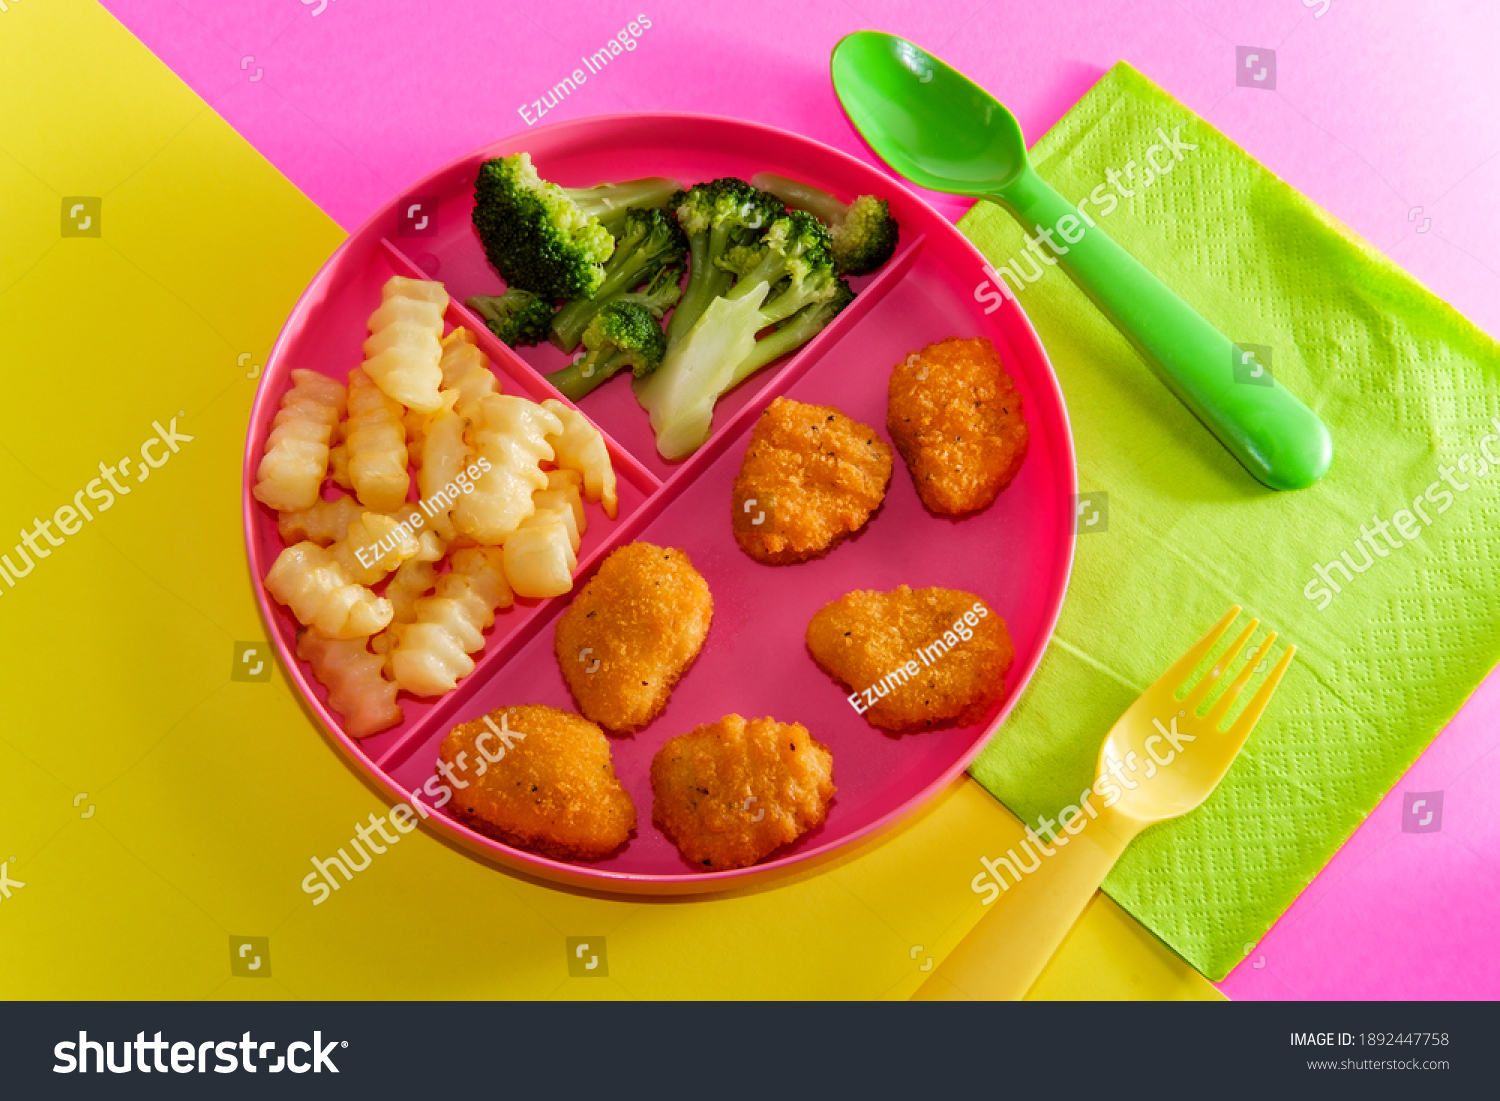 At home schooling chicken nugget lunch served on tray with french fries and broccoli #1892447758